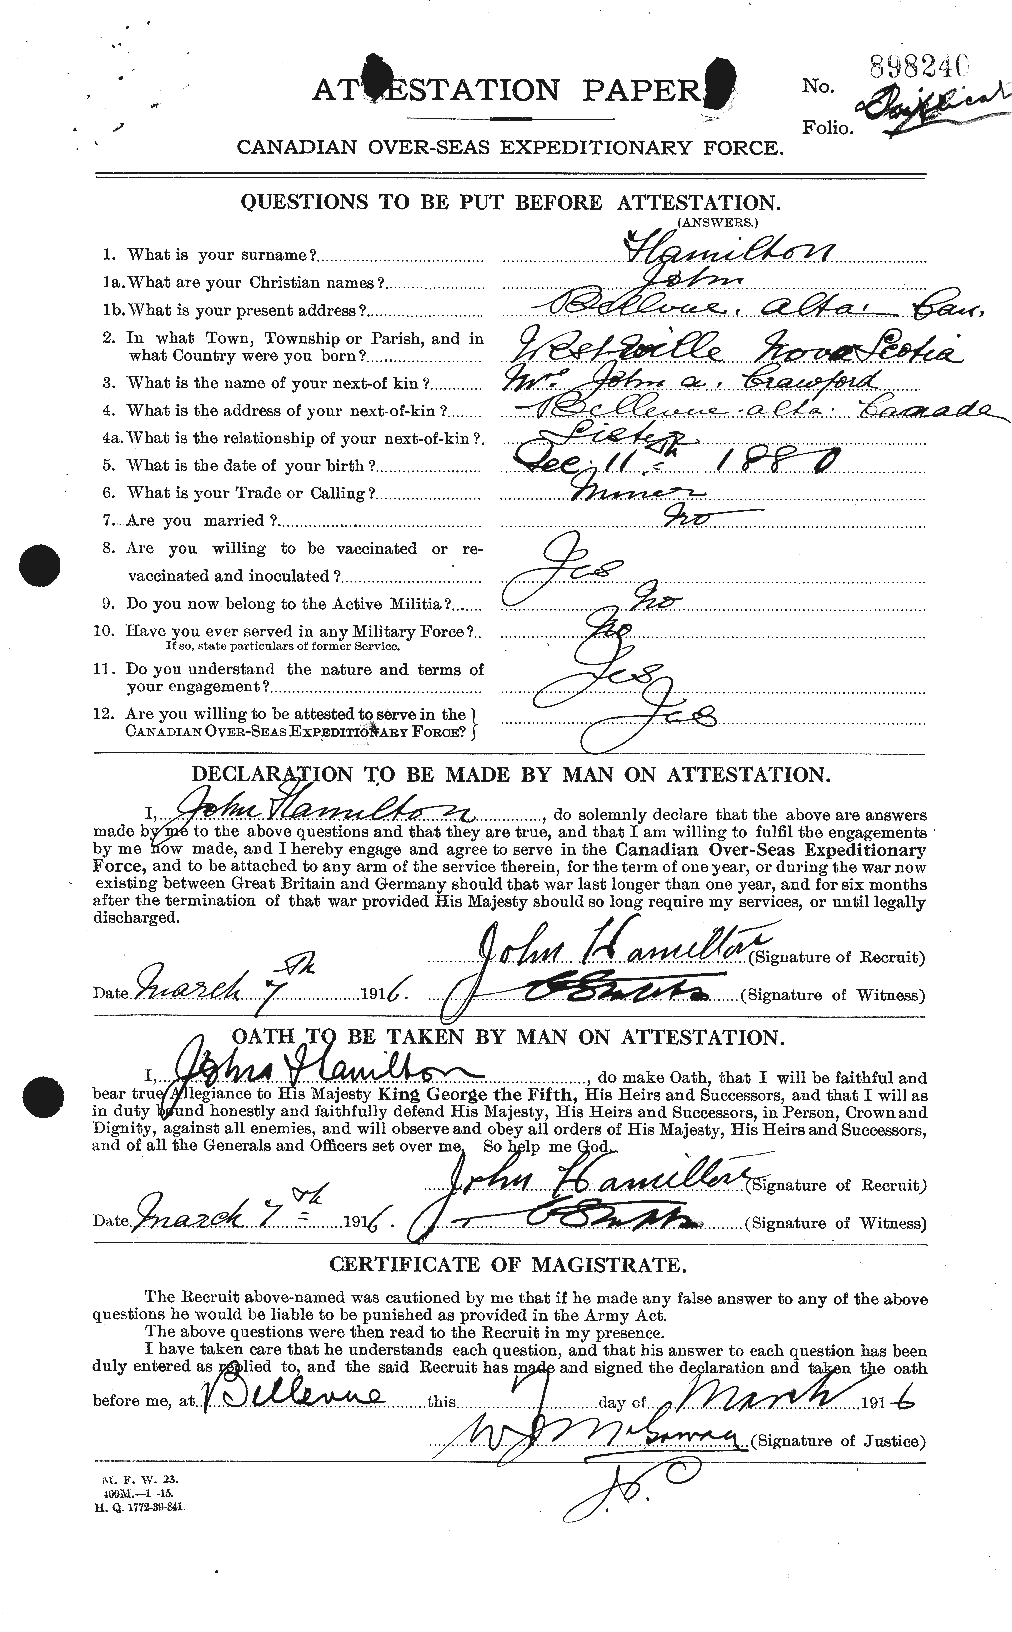 Personnel Records of the First World War - CEF 373046a